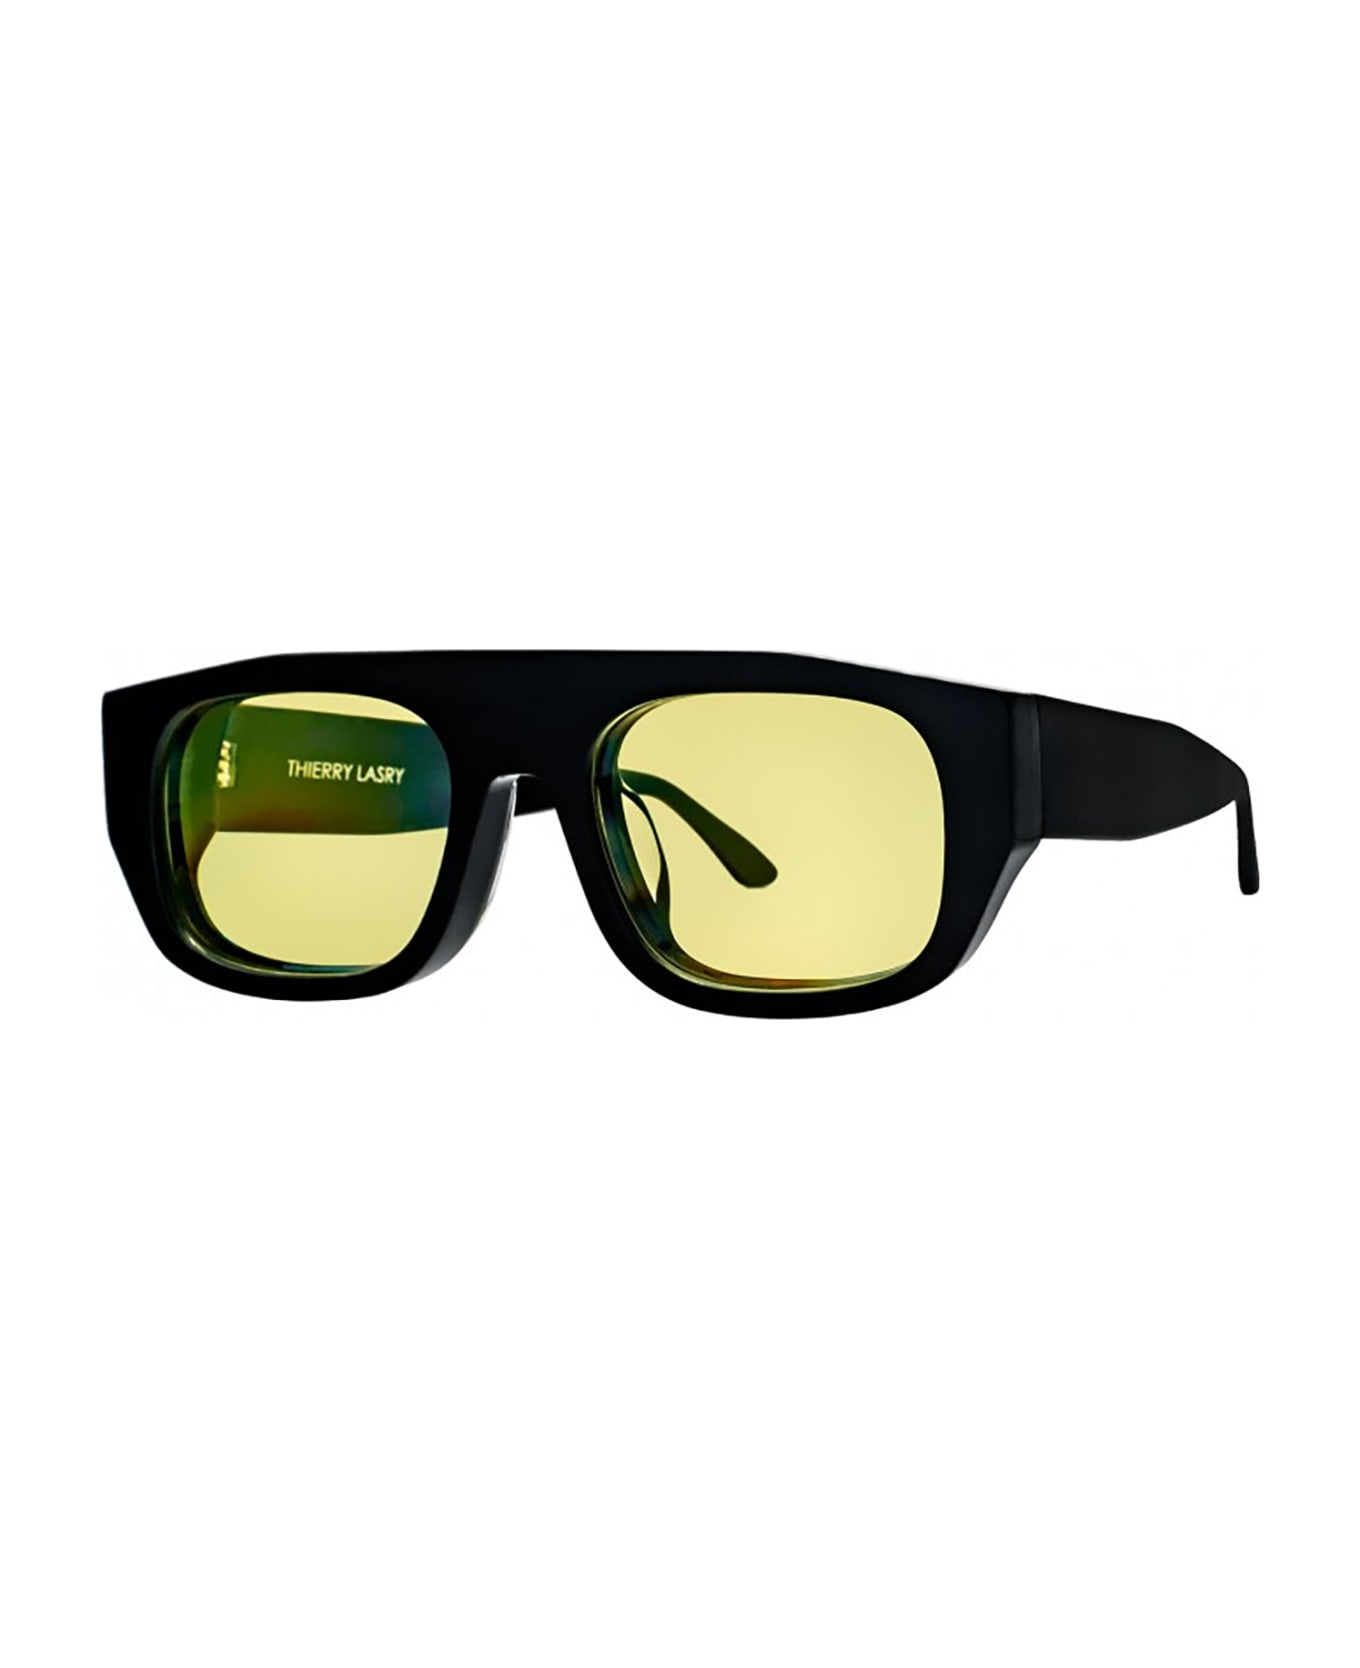 Thierry Lasry MONARCHY Sunglasses - Yellow